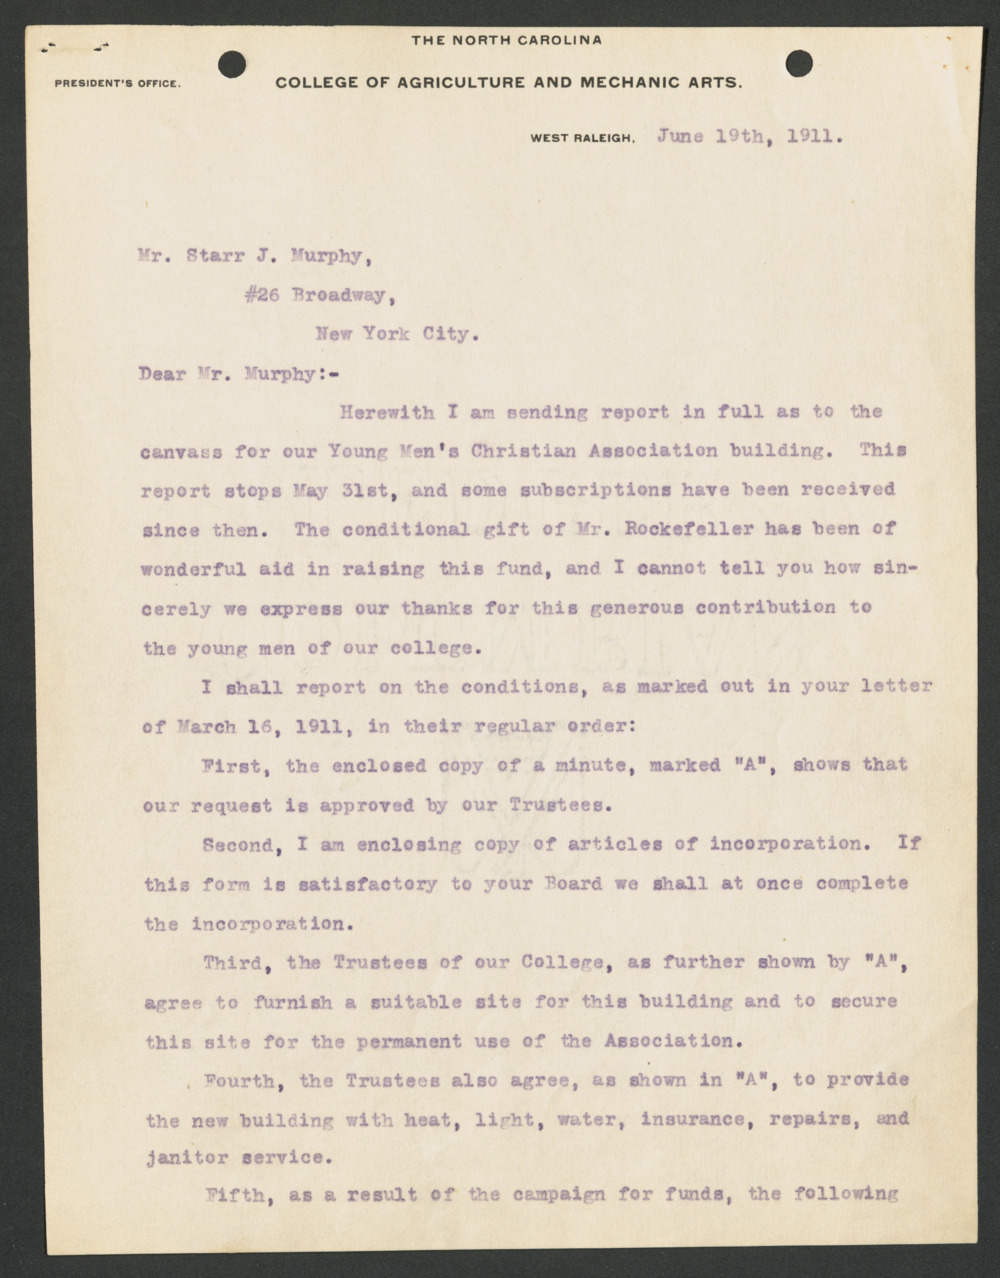 An image of the first page of a type letter from D.H. Hill Jr. to Mr. Starr J. Murphy. The letter is dated June 19th, 1911.